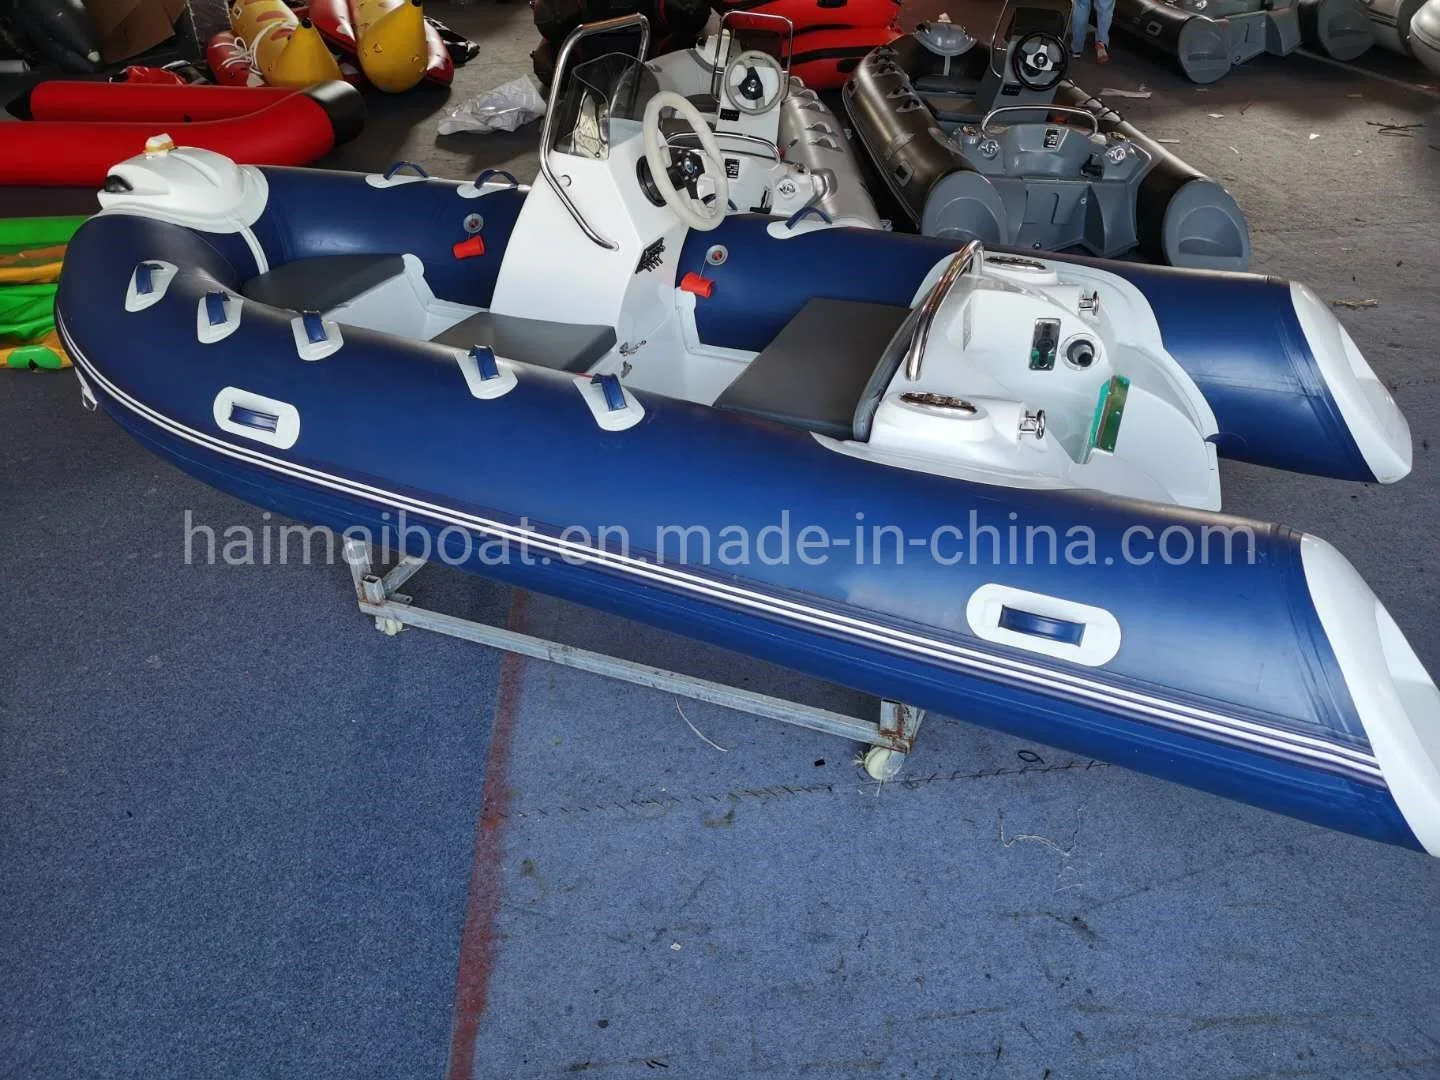 China Professional Boat Manufacturer 11.8FT 3.6m Fiberglass Narwhal Inflatable Craft Military Patrol Boat Panga Boat Outboard Motor Boat Rescue Boat with Ce